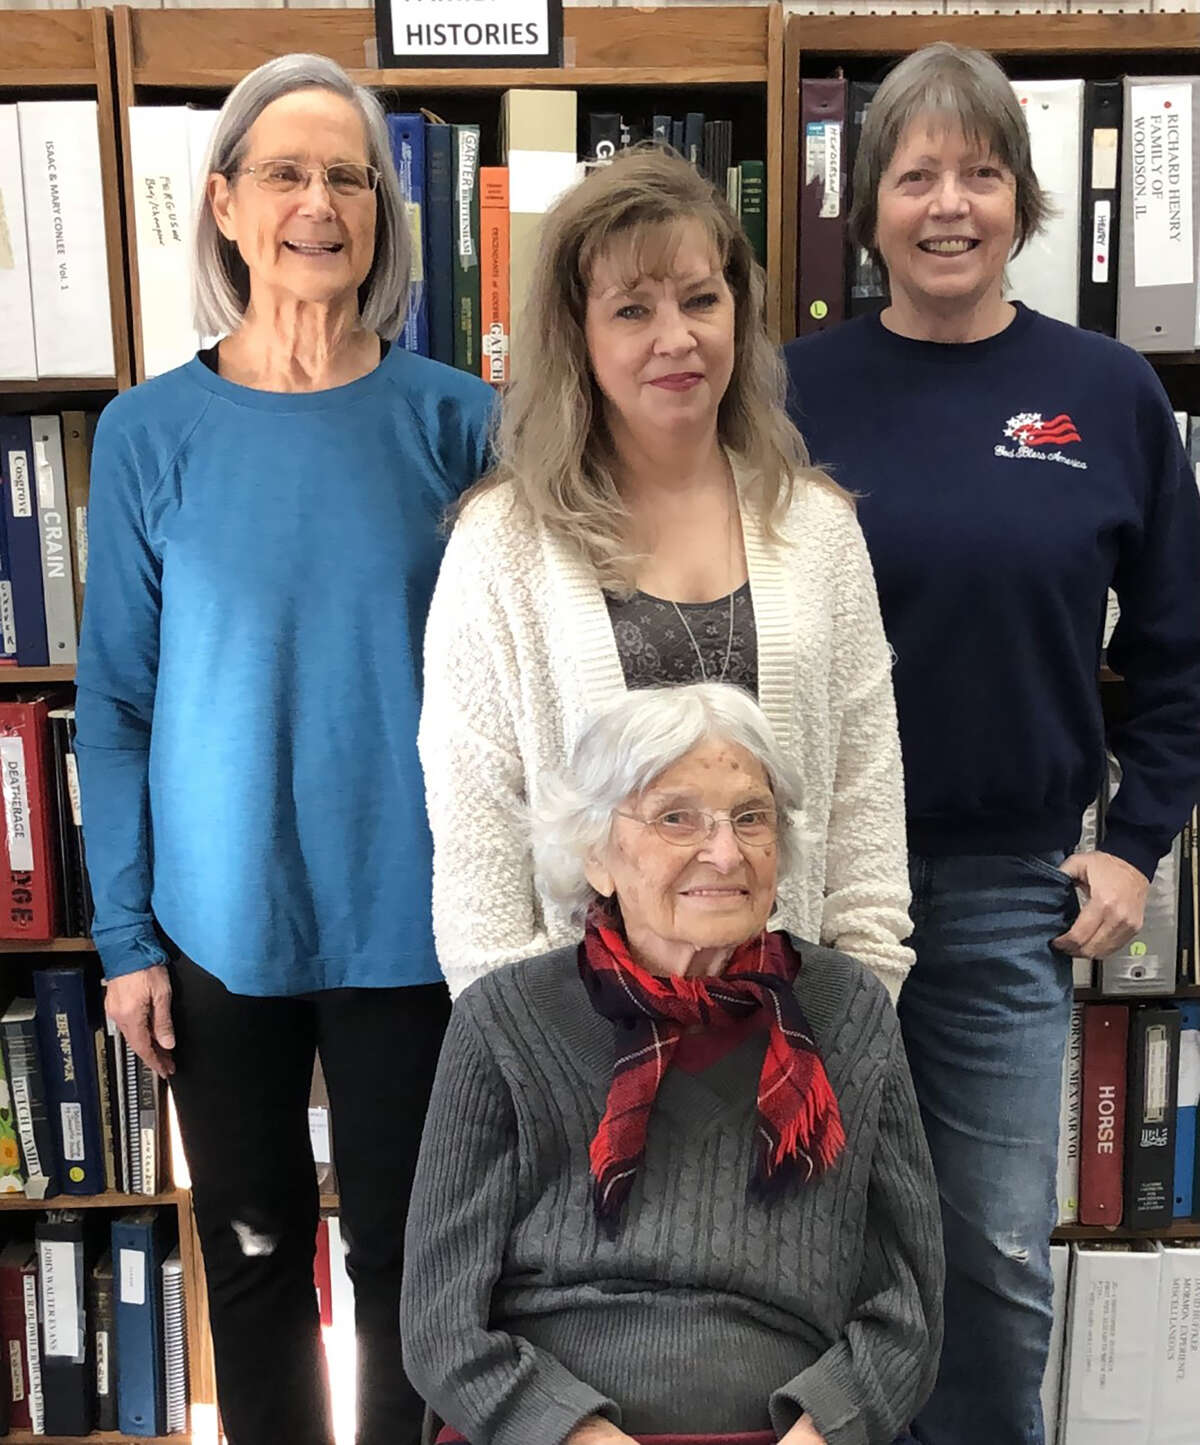 Jacksonville Area Genealogical and Historical Society recently installed its officers for 2022. They are Elizabeth Hardy (front row), vice president; Wanda Dame (back row, from left), treasurer; Chris Marshall, president; and Anne Jackson, secretary. The historical society, at 416 S. Main St., is open from 1 to 3 p.m. weekdays. New members and researchers are welcome.